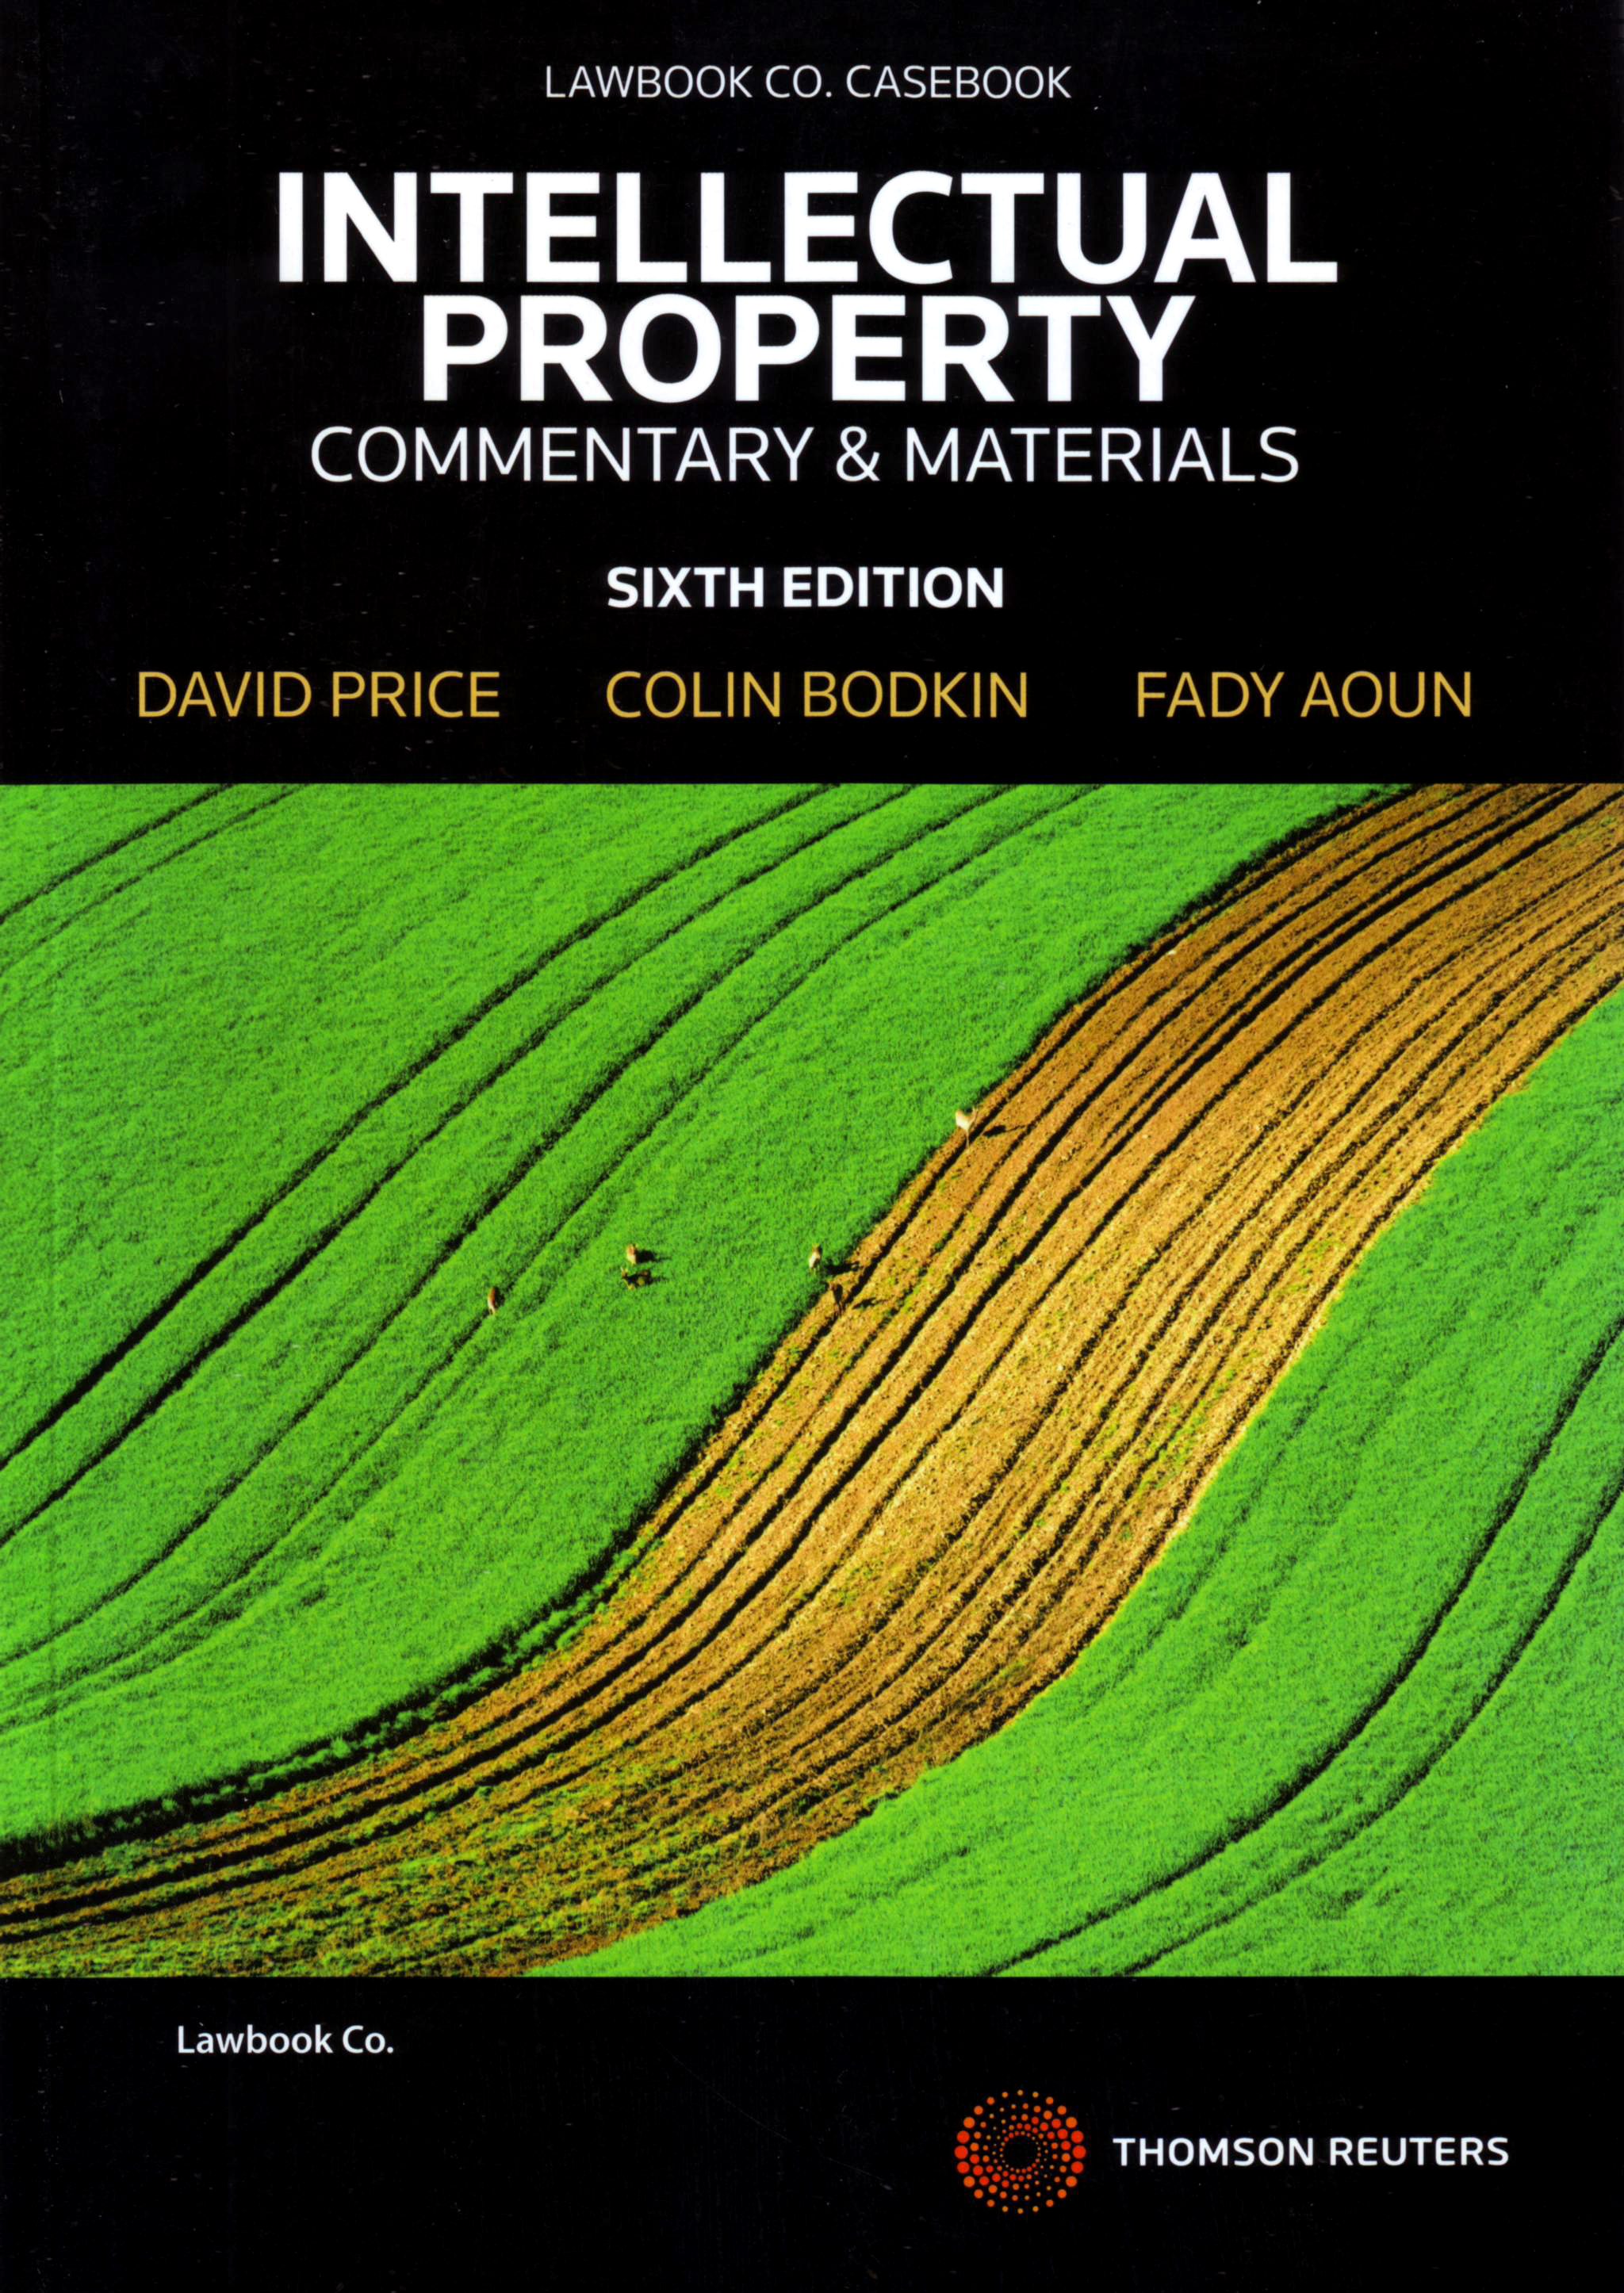 Intellectual Property: Commentary & Materials e6